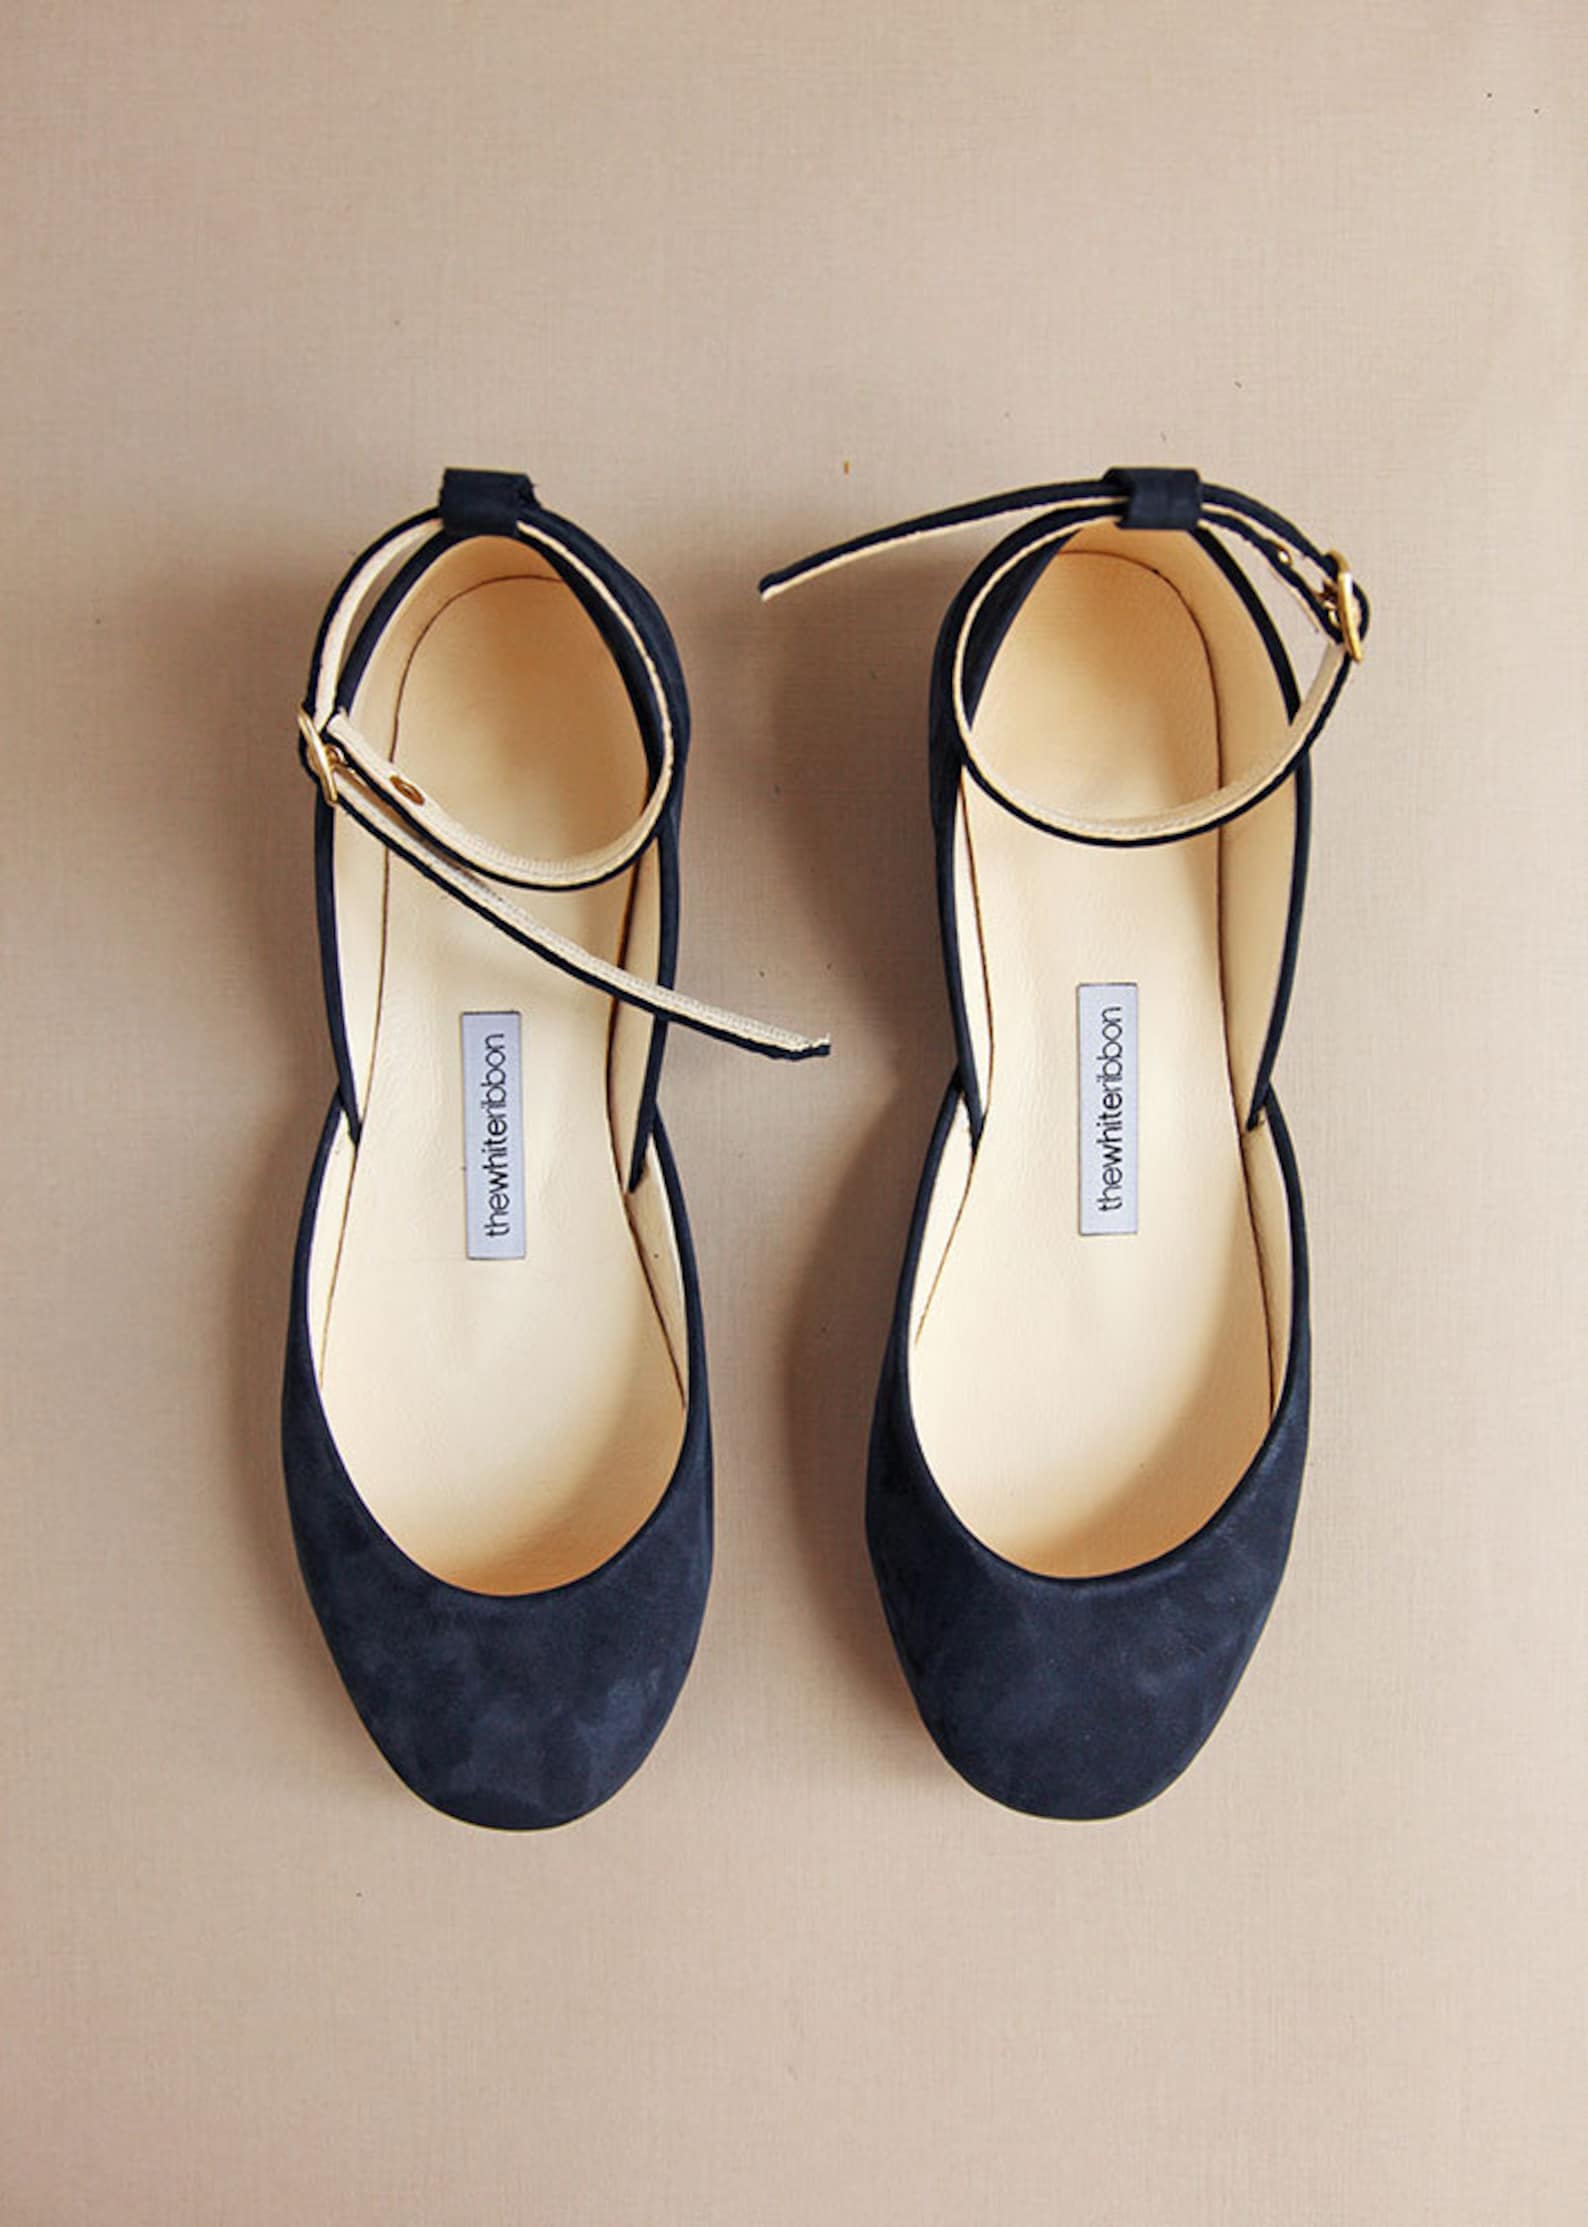 the navy blue wedding ballet flats | bridal shoes with satin ribbons | pointe style shoes ... navy nubuck ... ready to ship